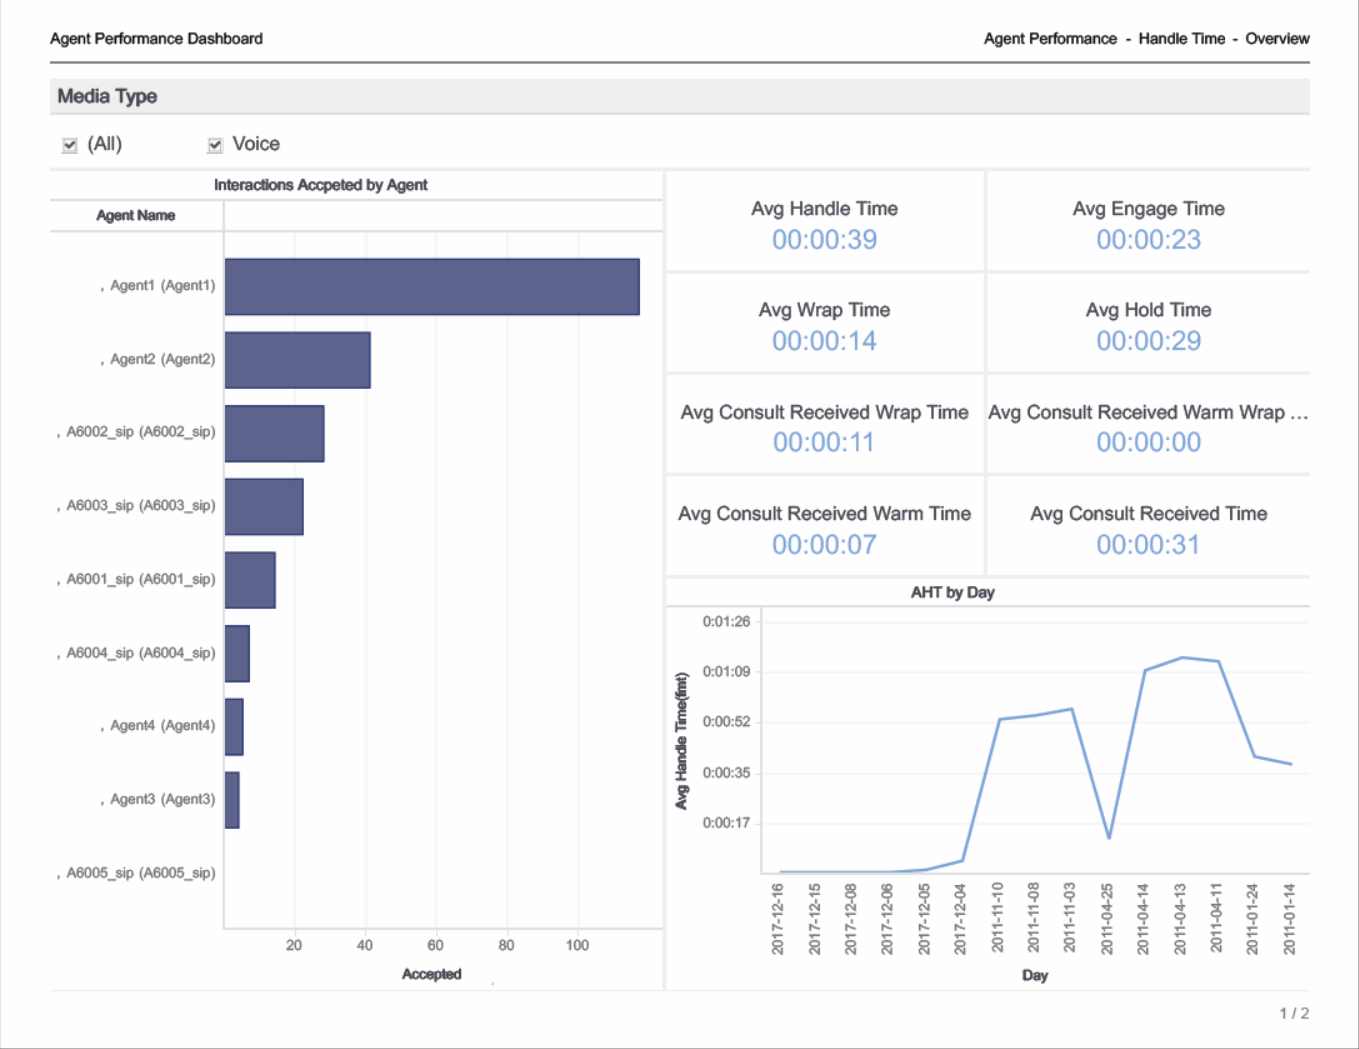 The Agent Performance Dashboard